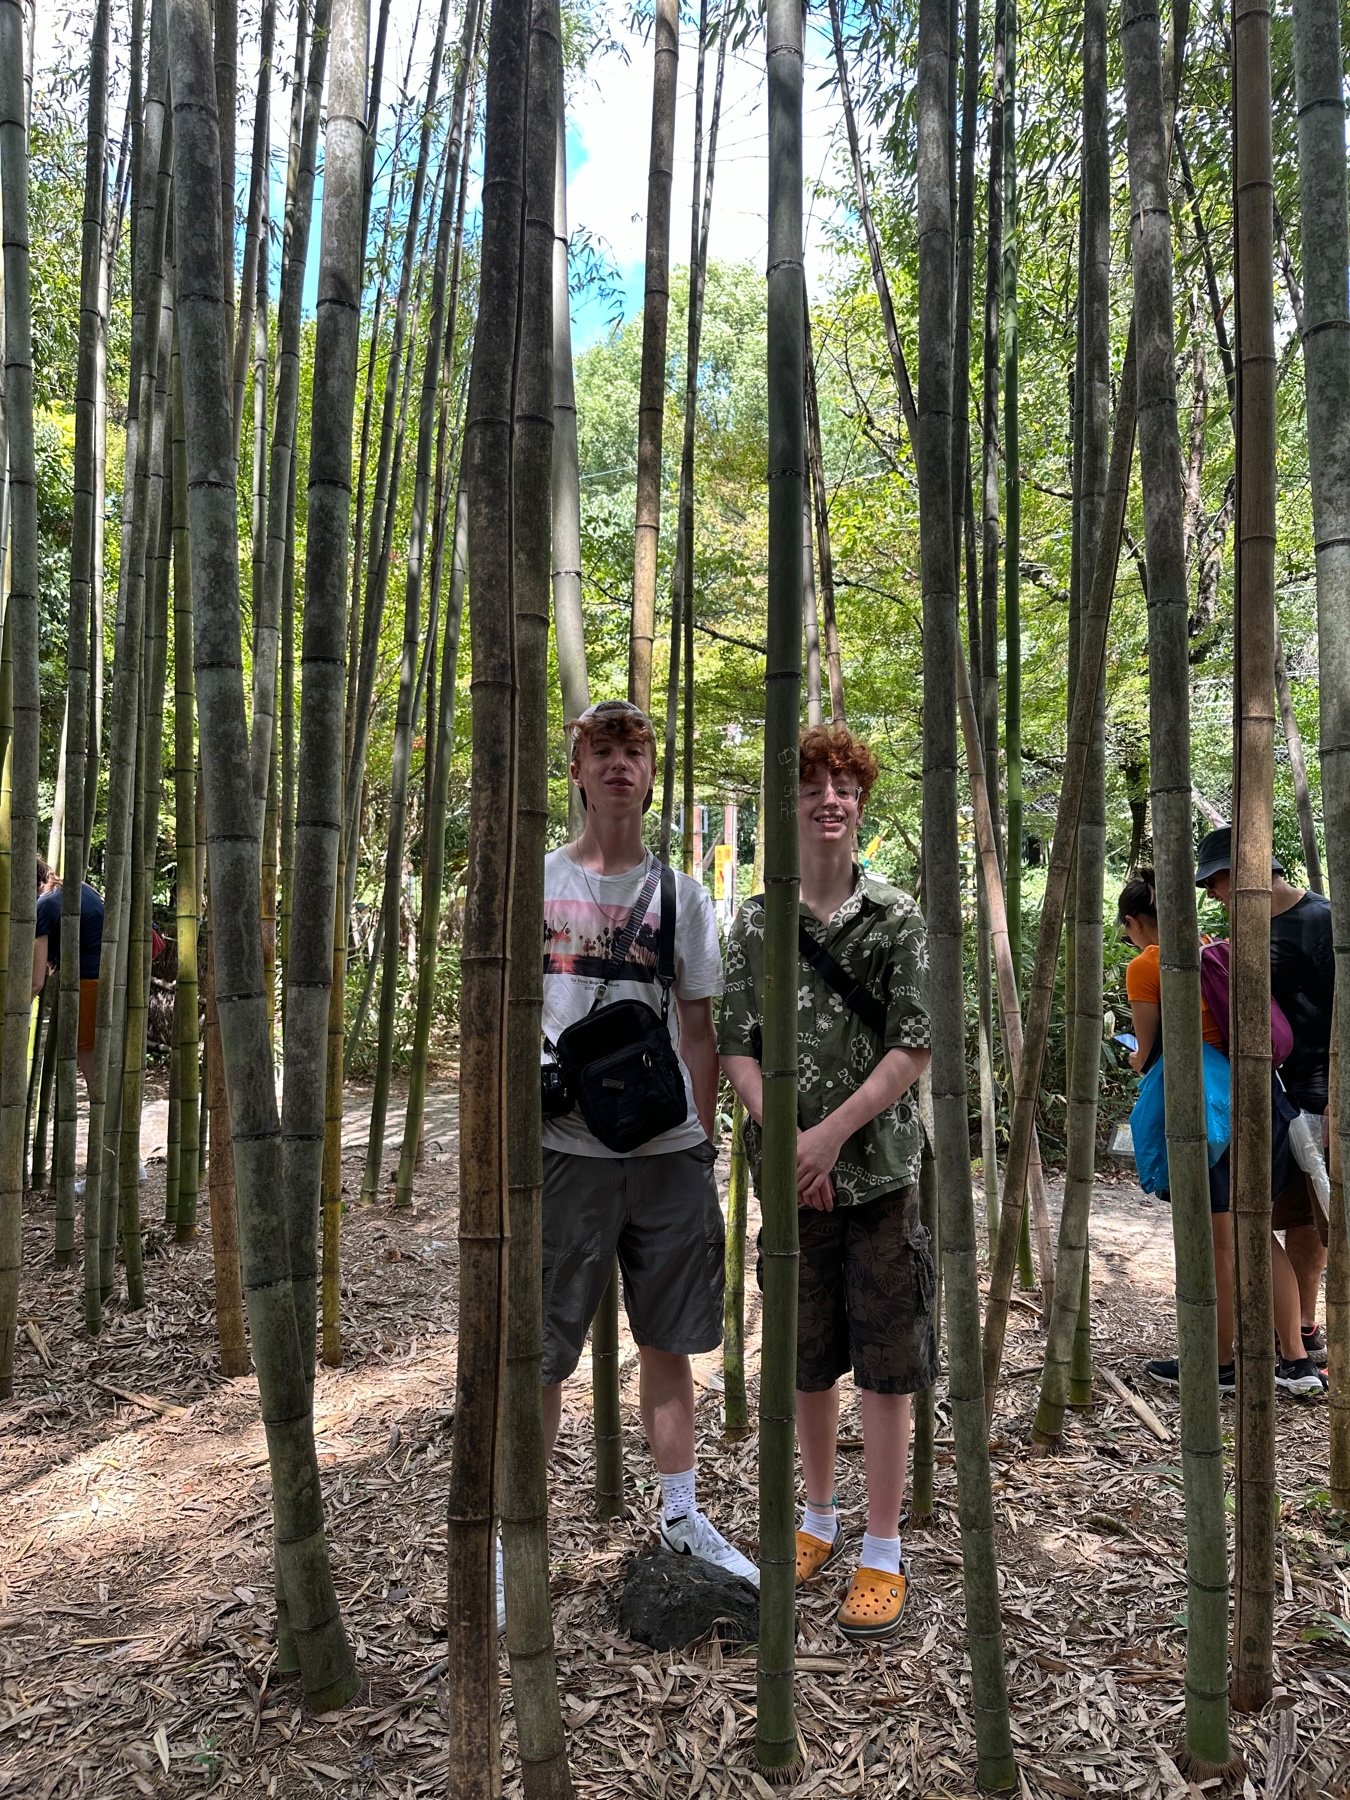 My sons photo&rsquo;d in the middle of the bamboo